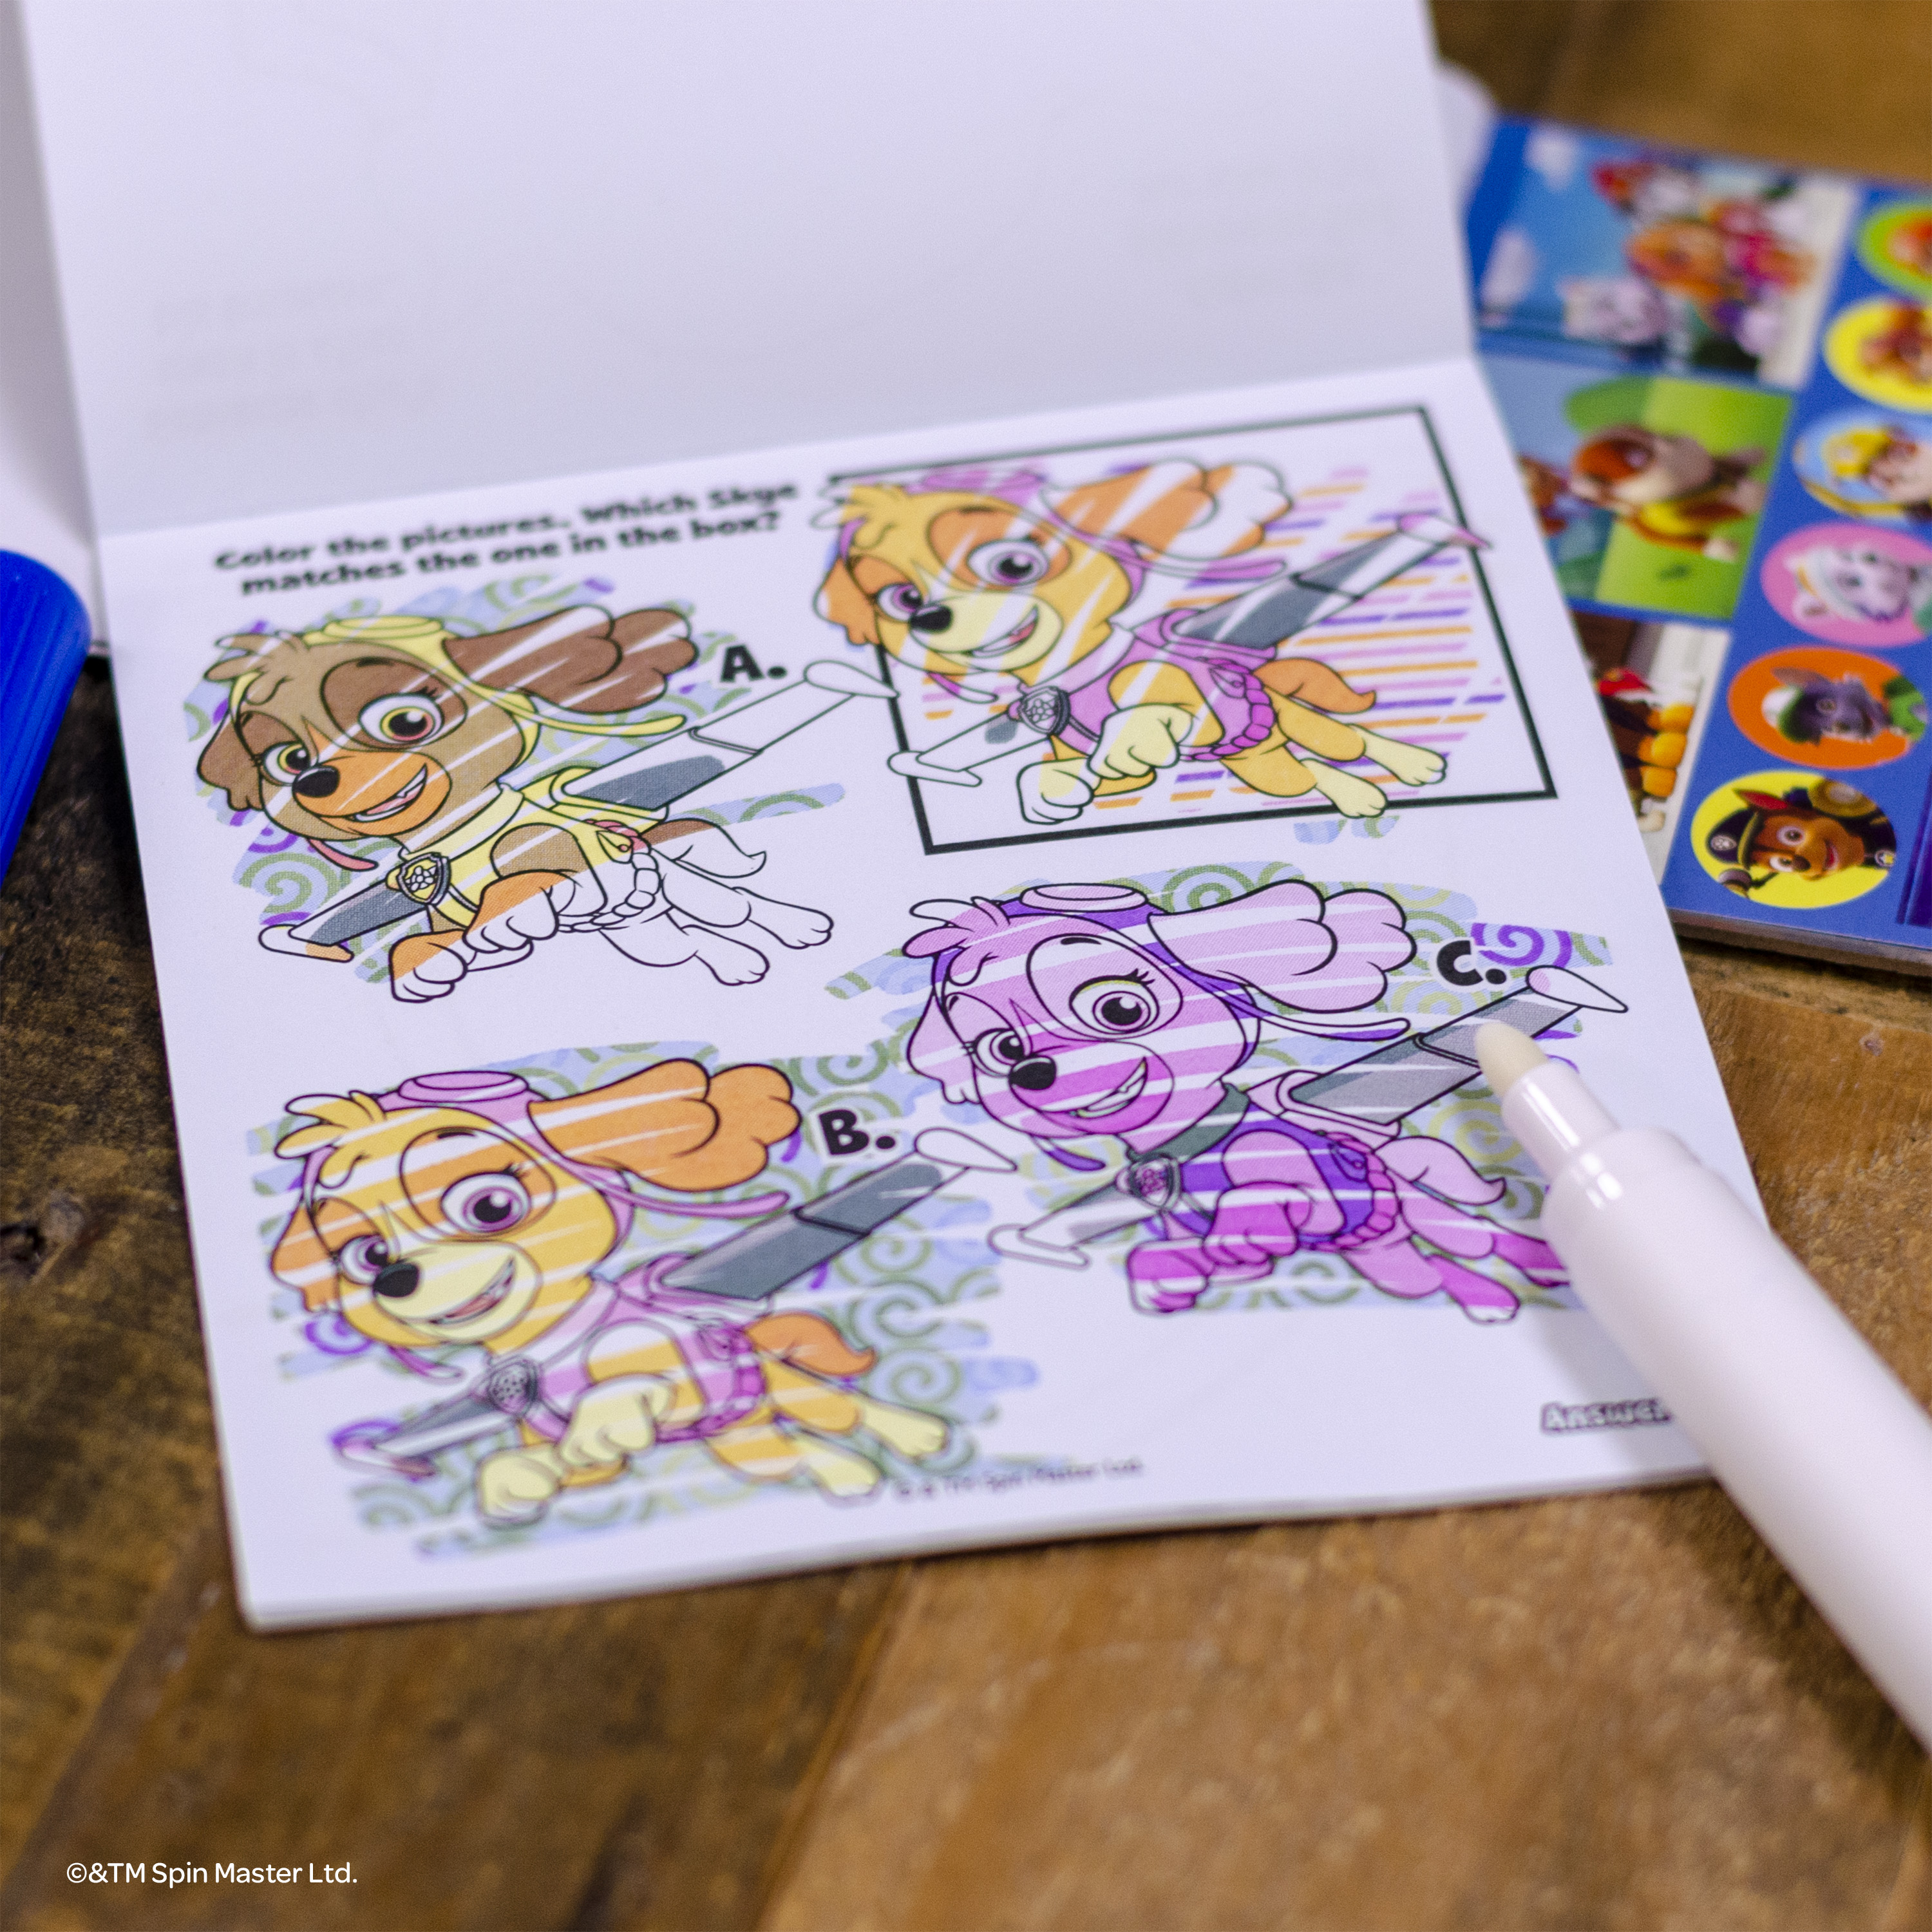 PAW Patrol World Of Art & Activity Kit with an Imagine Ink Book - image 6 of 8